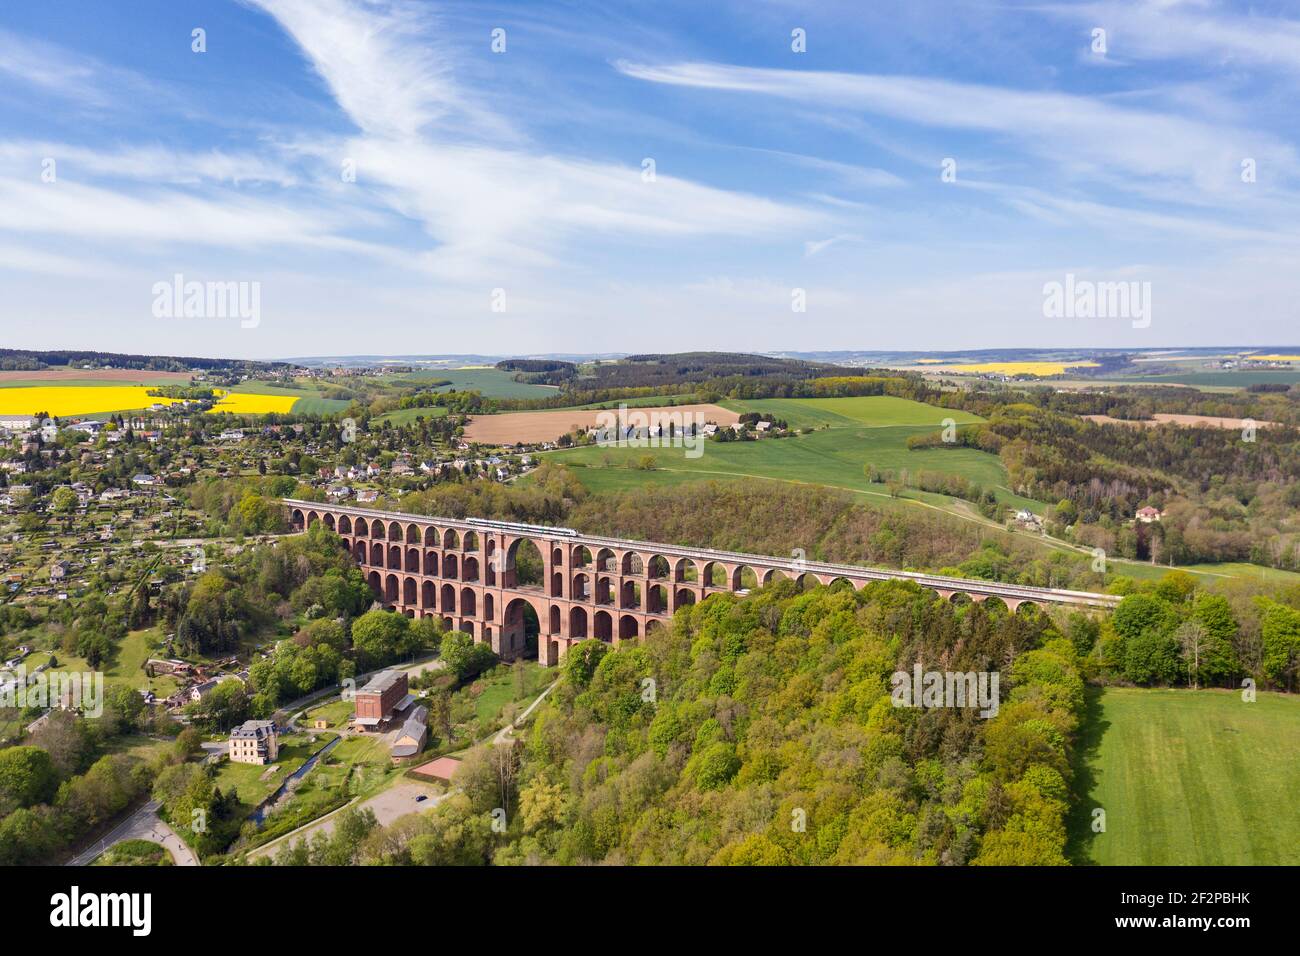 Largest brick arch bridge in the world (574 m long, 78 m high) Train, houses, valley, forest Stock Photo